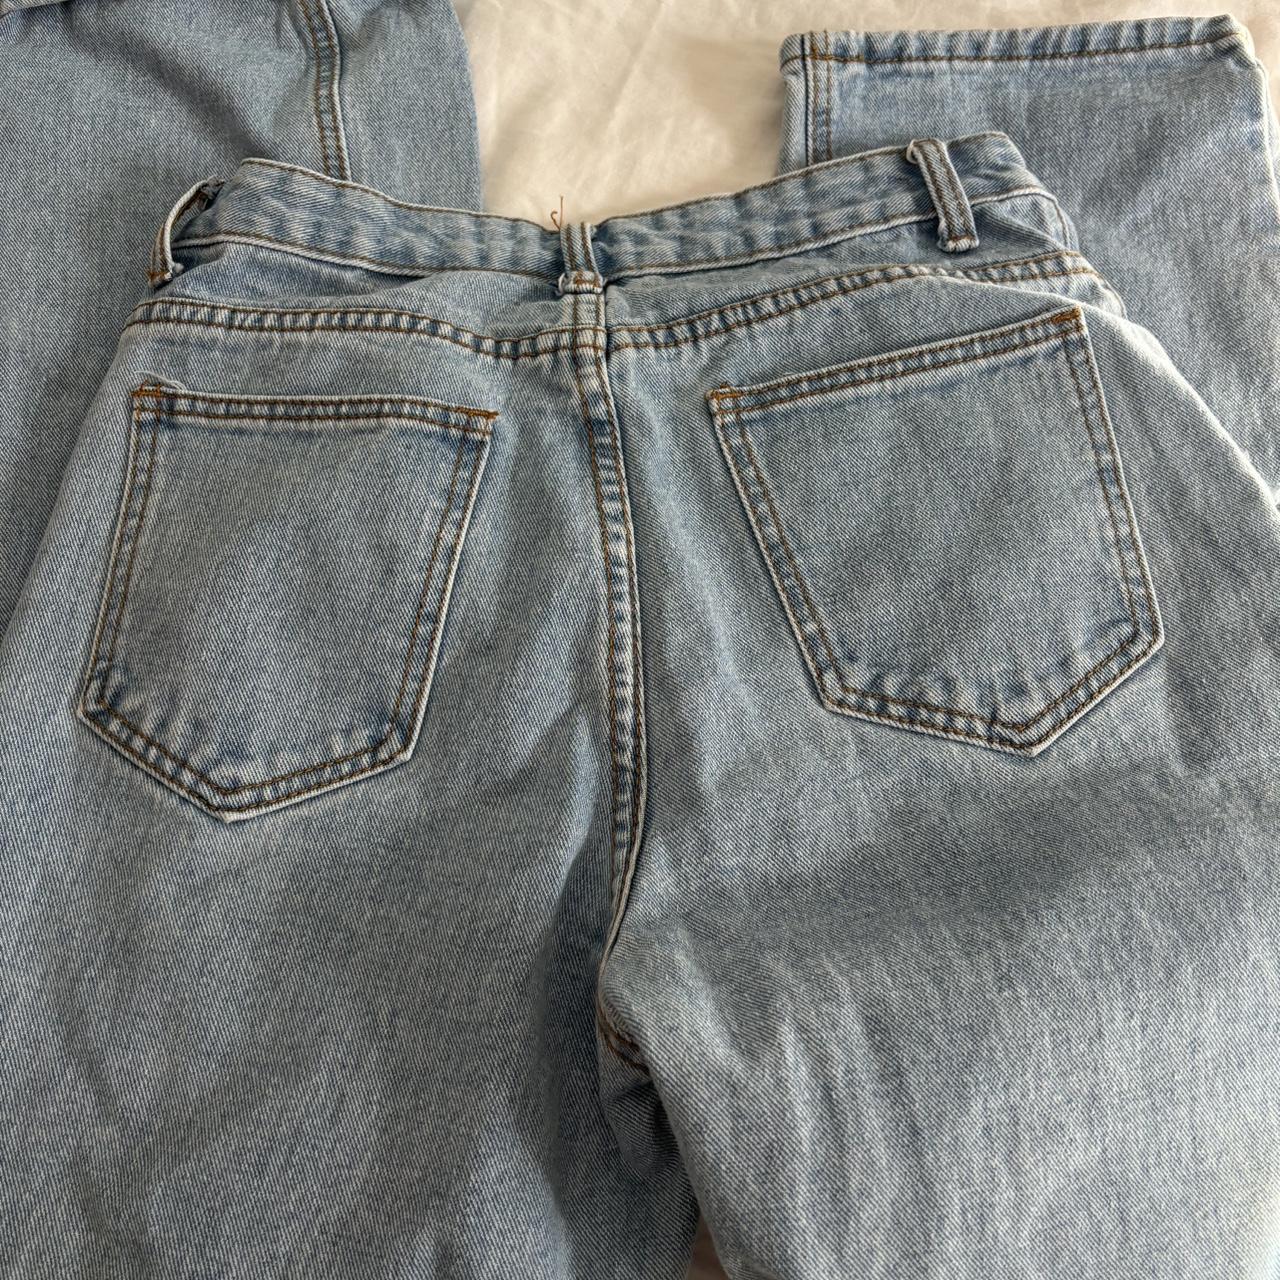 Baggy light wash denim jeans from SHEIN size small-... - Depop